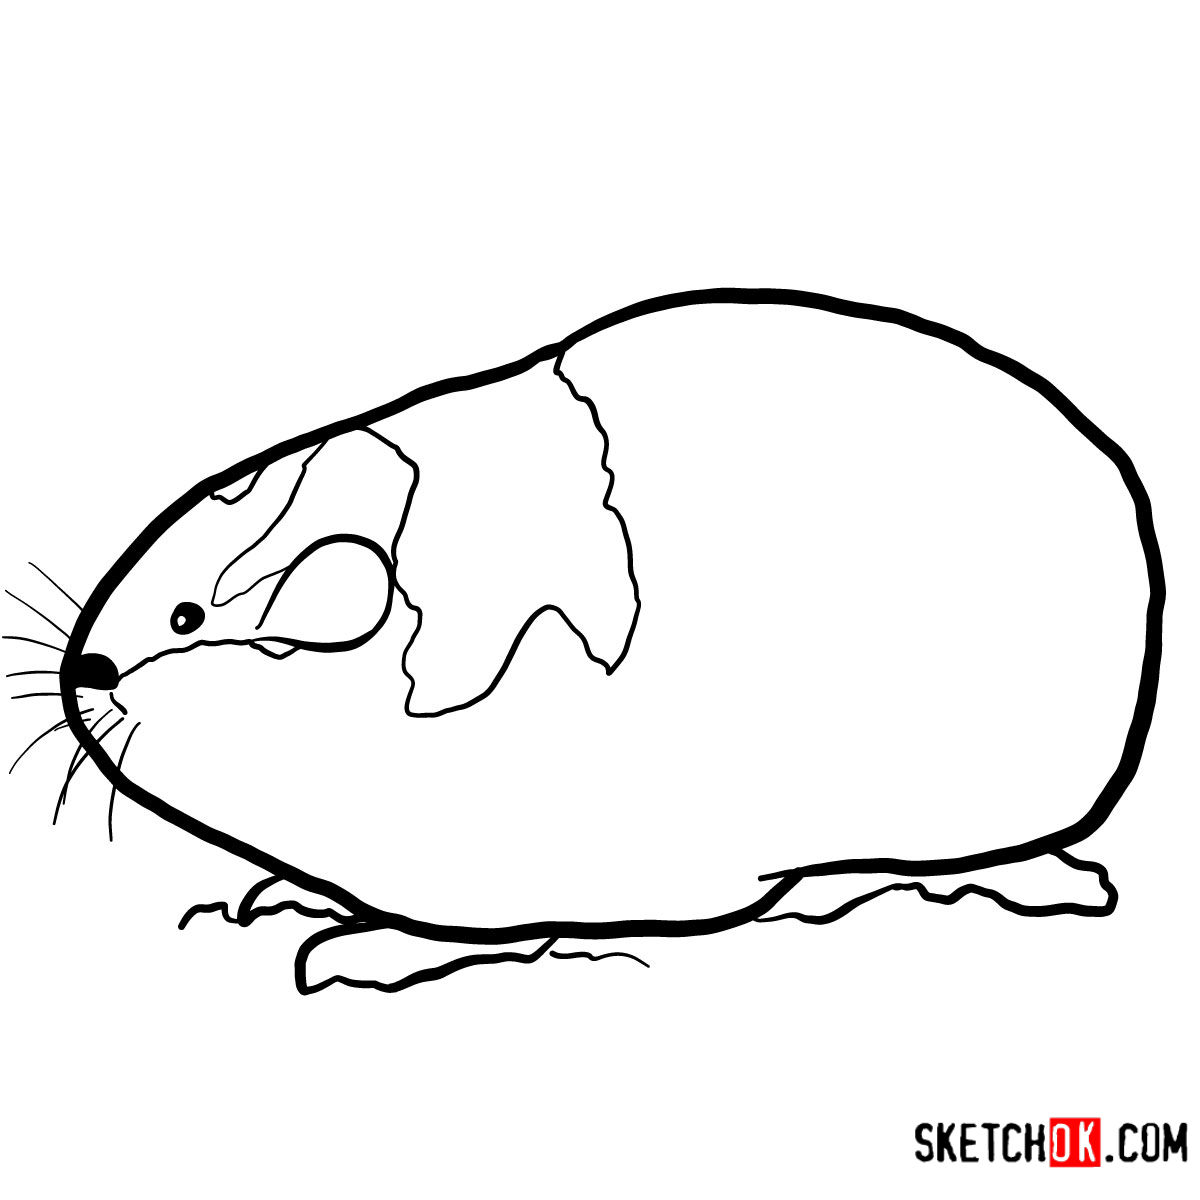 How to draw a Lemming